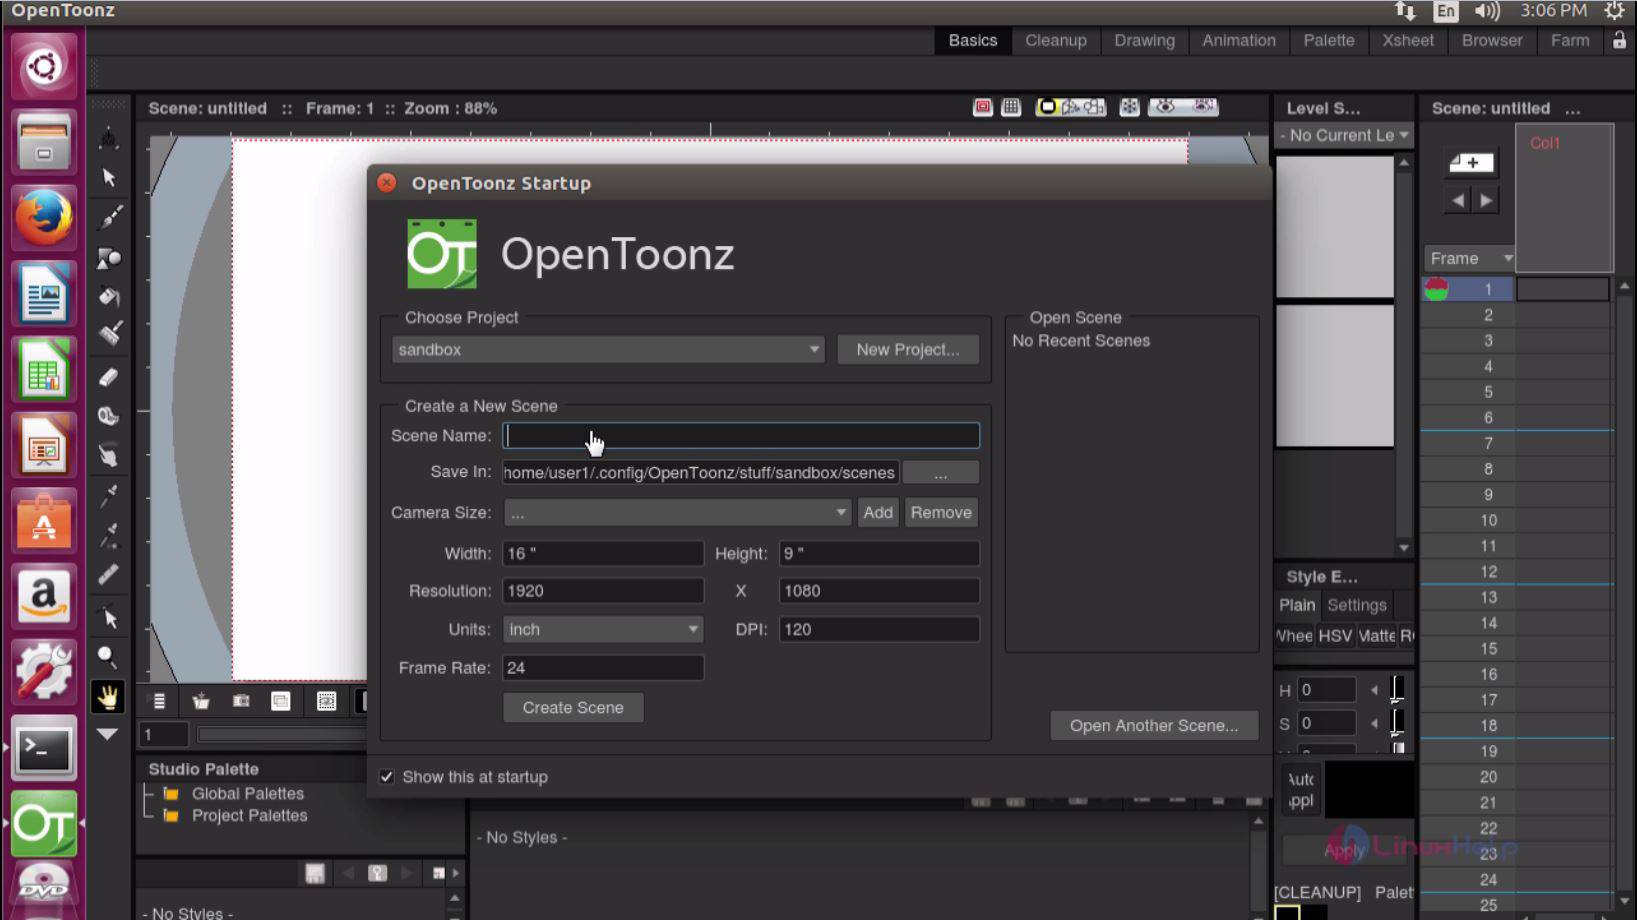 Top 7 Free and Open Source Animation Software Tools